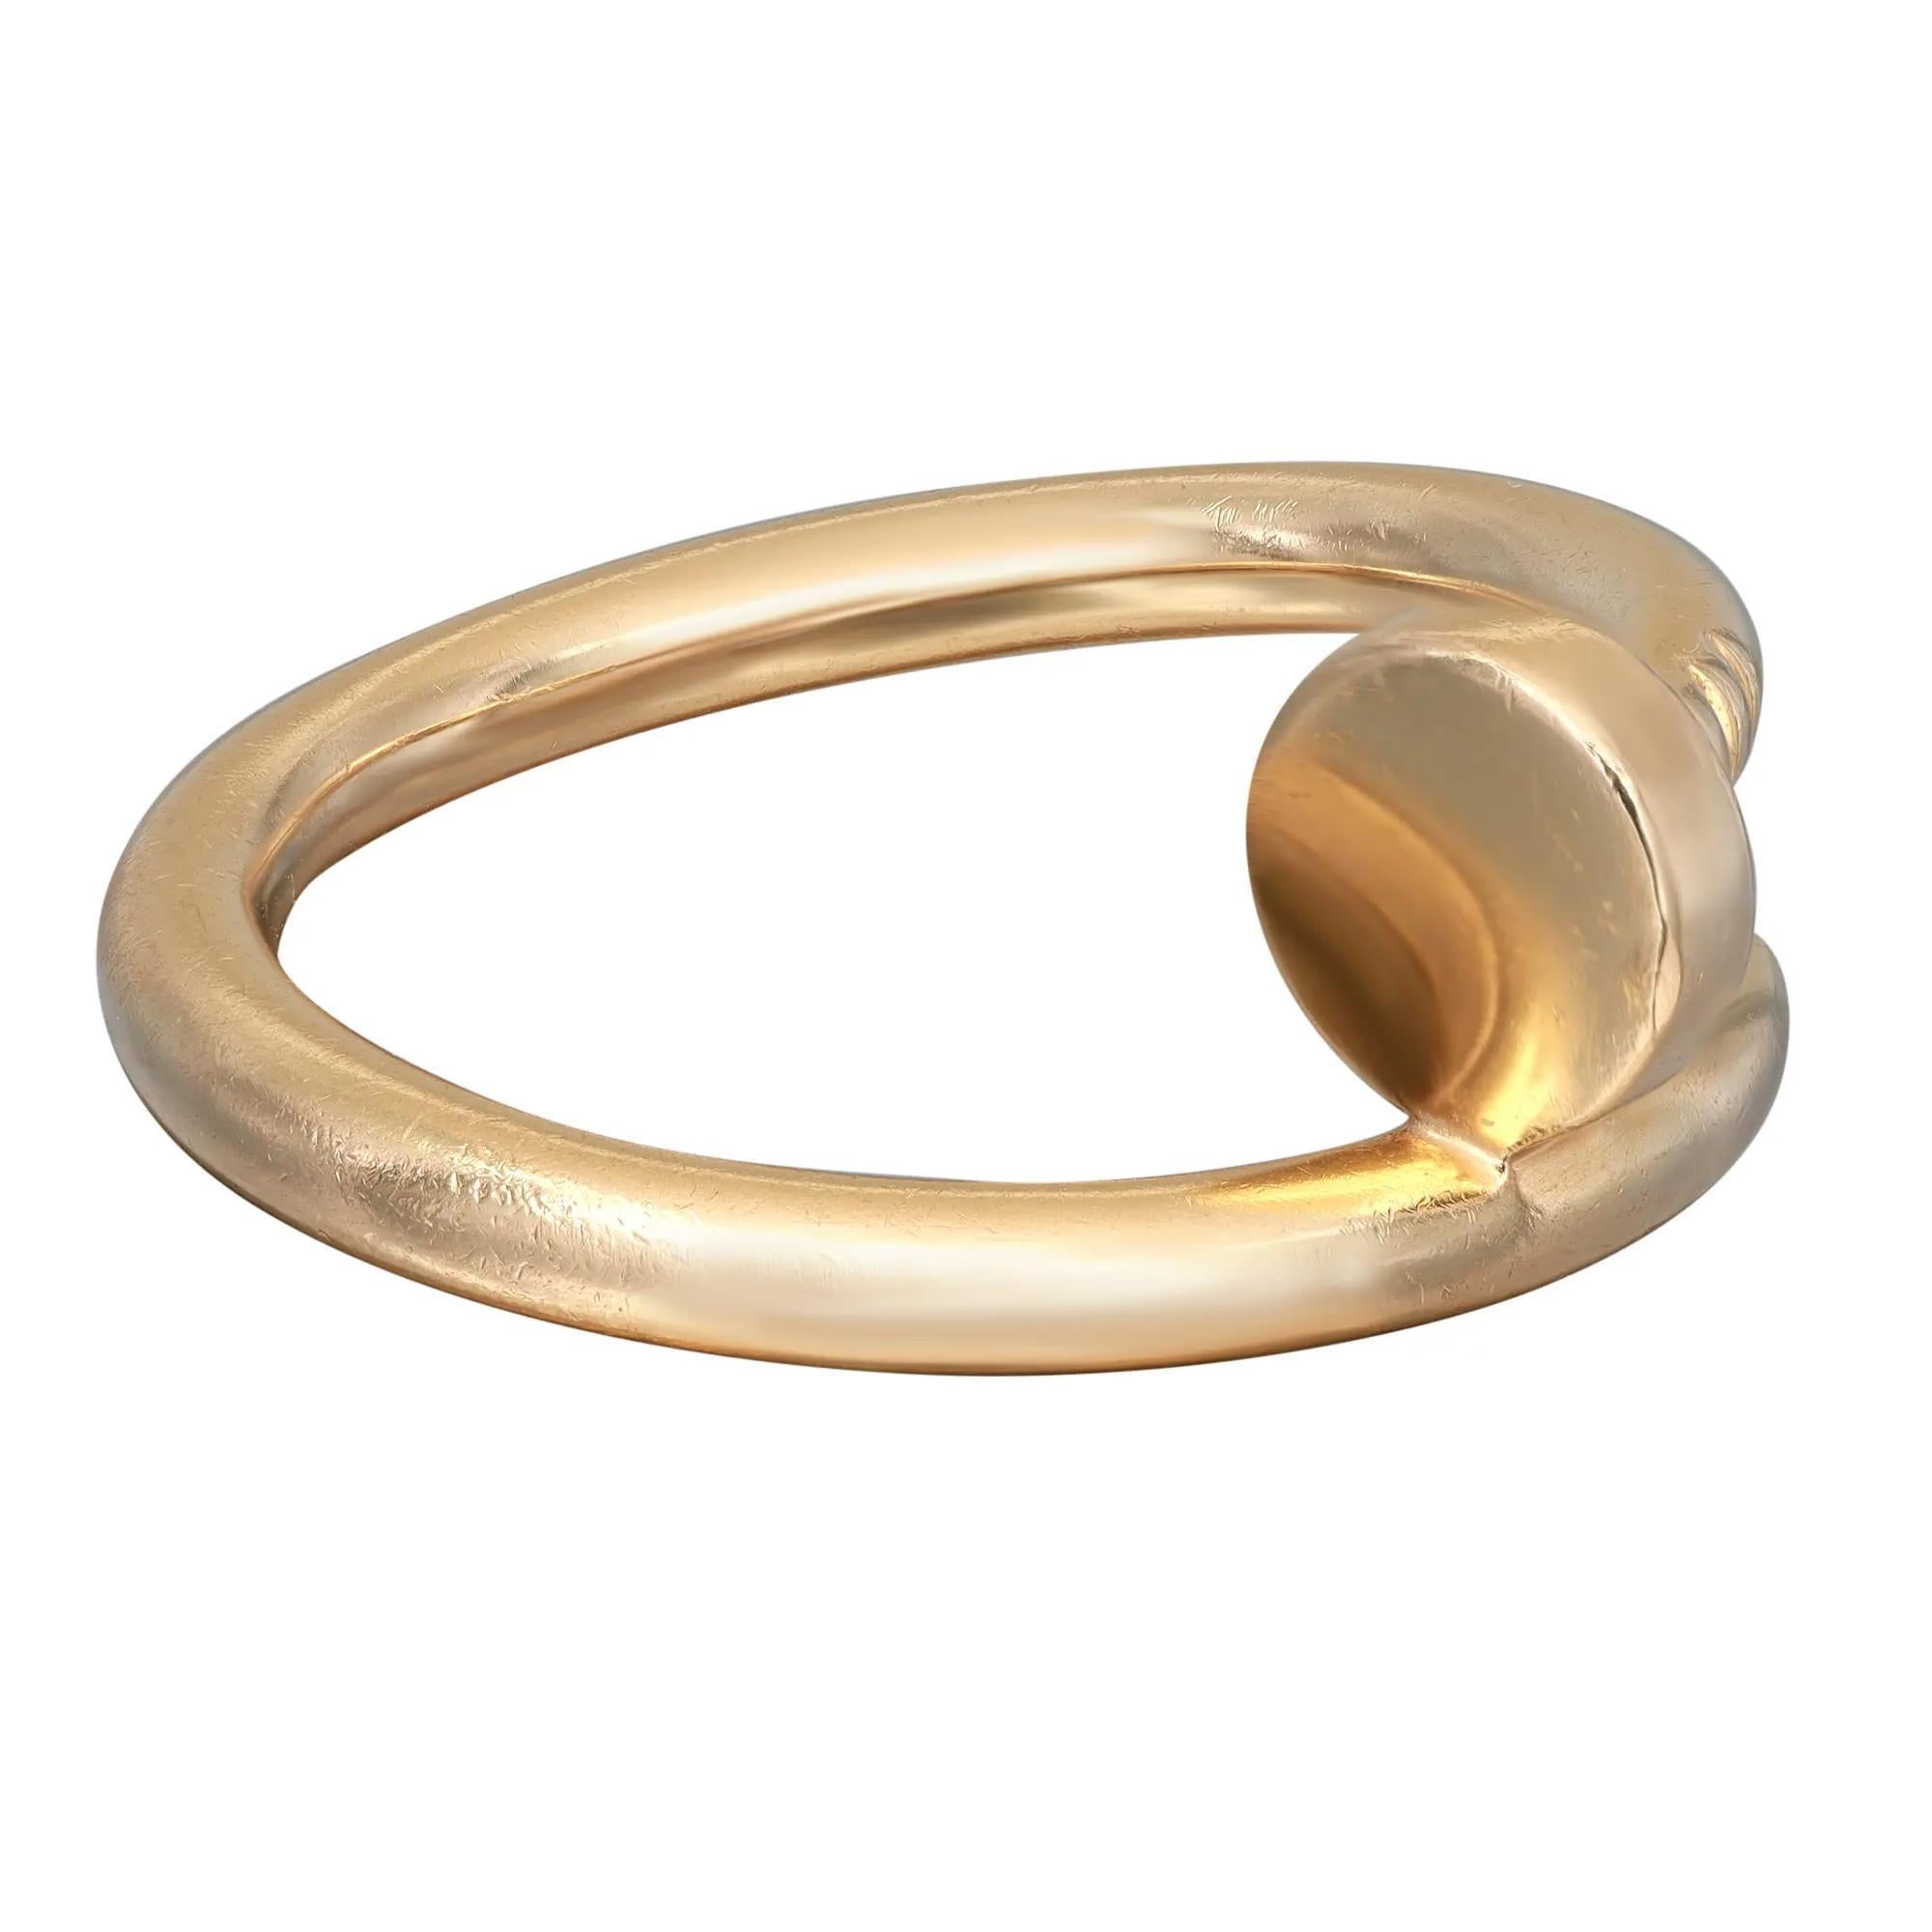 JUSTE UN CLOU RING SM | Top Brand 18K Gold Jewelry Replica Cartier Jewelry,  Fake Van Cleef & Arpels Jewelry and Hermes Jewelry Knockoffs Sale Worldwide